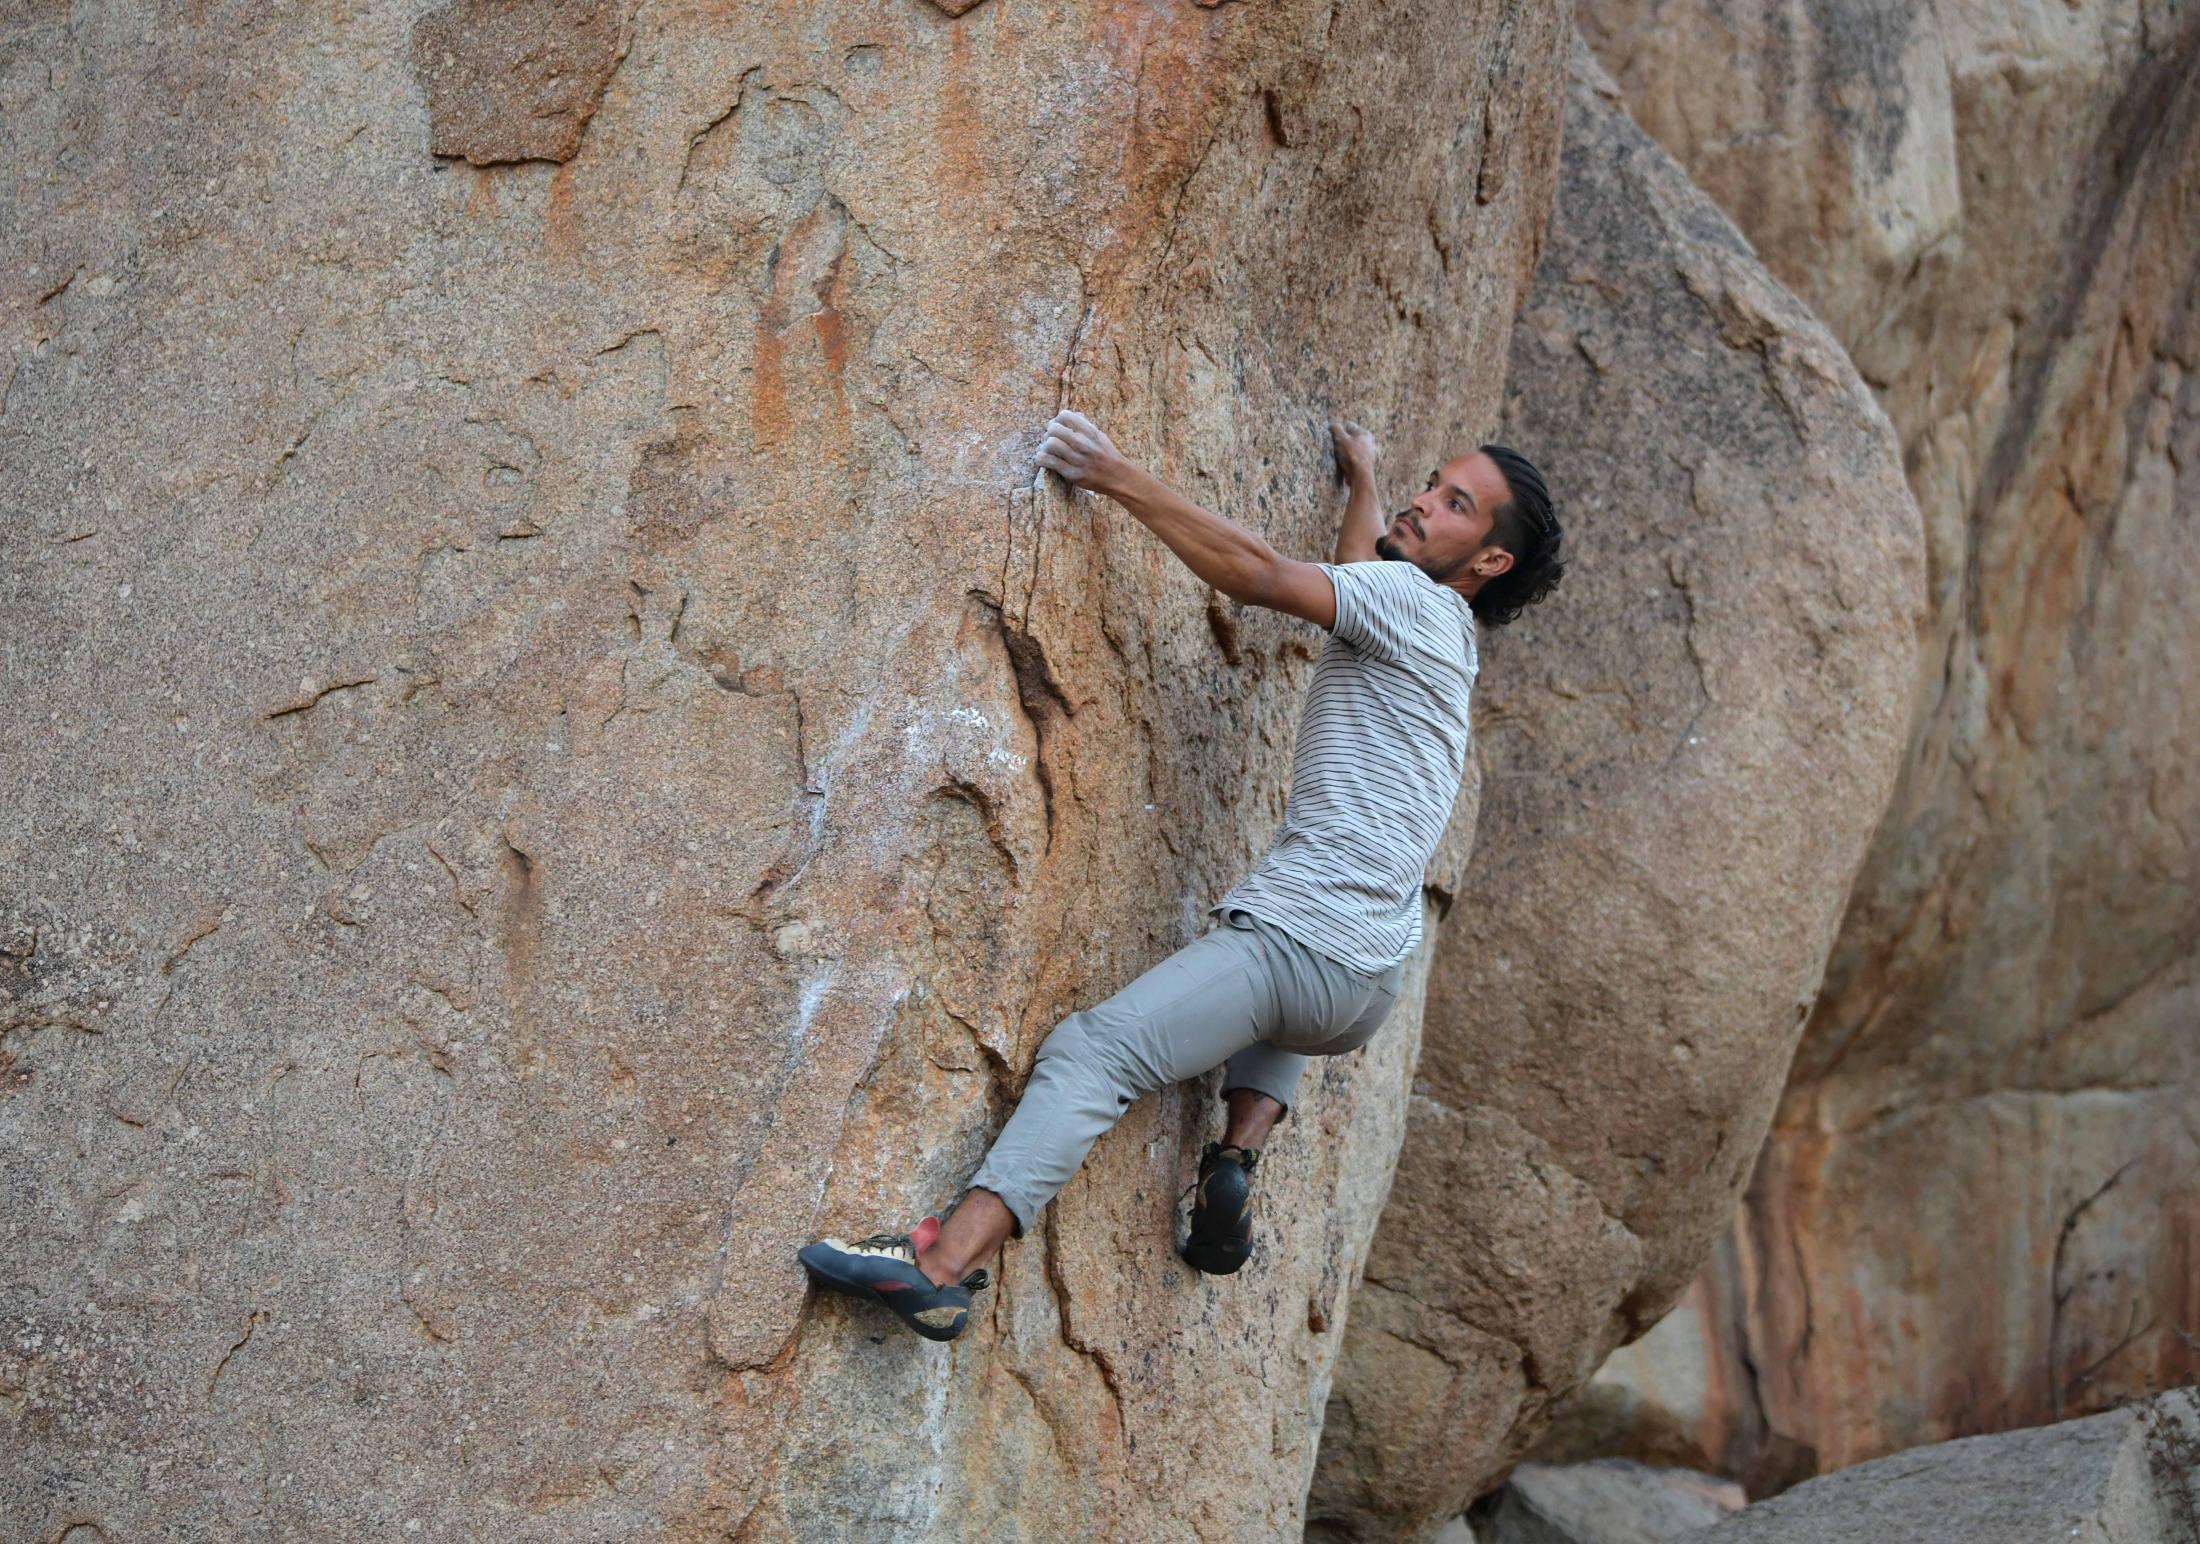 Sunny James - Hampi Boy said - &quot;While I couldn&rsquo;t pursue a career in architecture, I have made my peace with climbing and train people today.&quot;